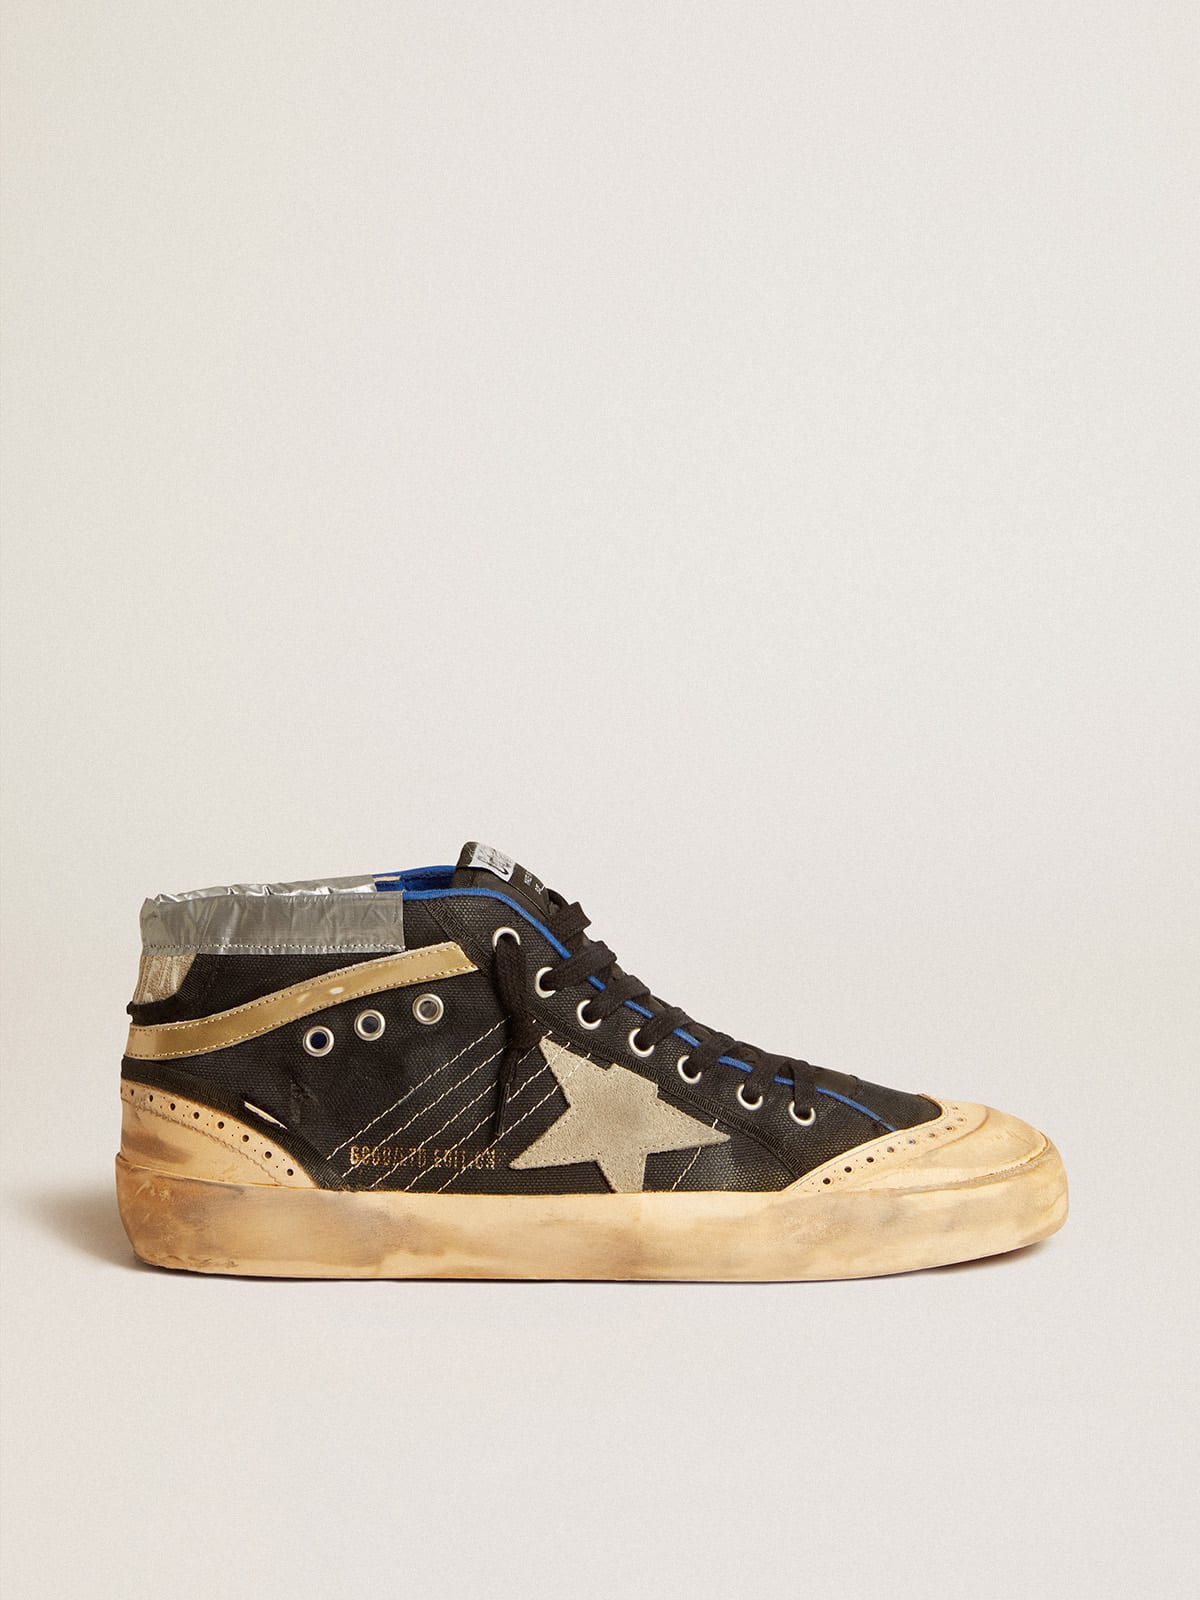 Women\'s Mid Star LAB in black canvas with ice-gray suede star | Golden Goose